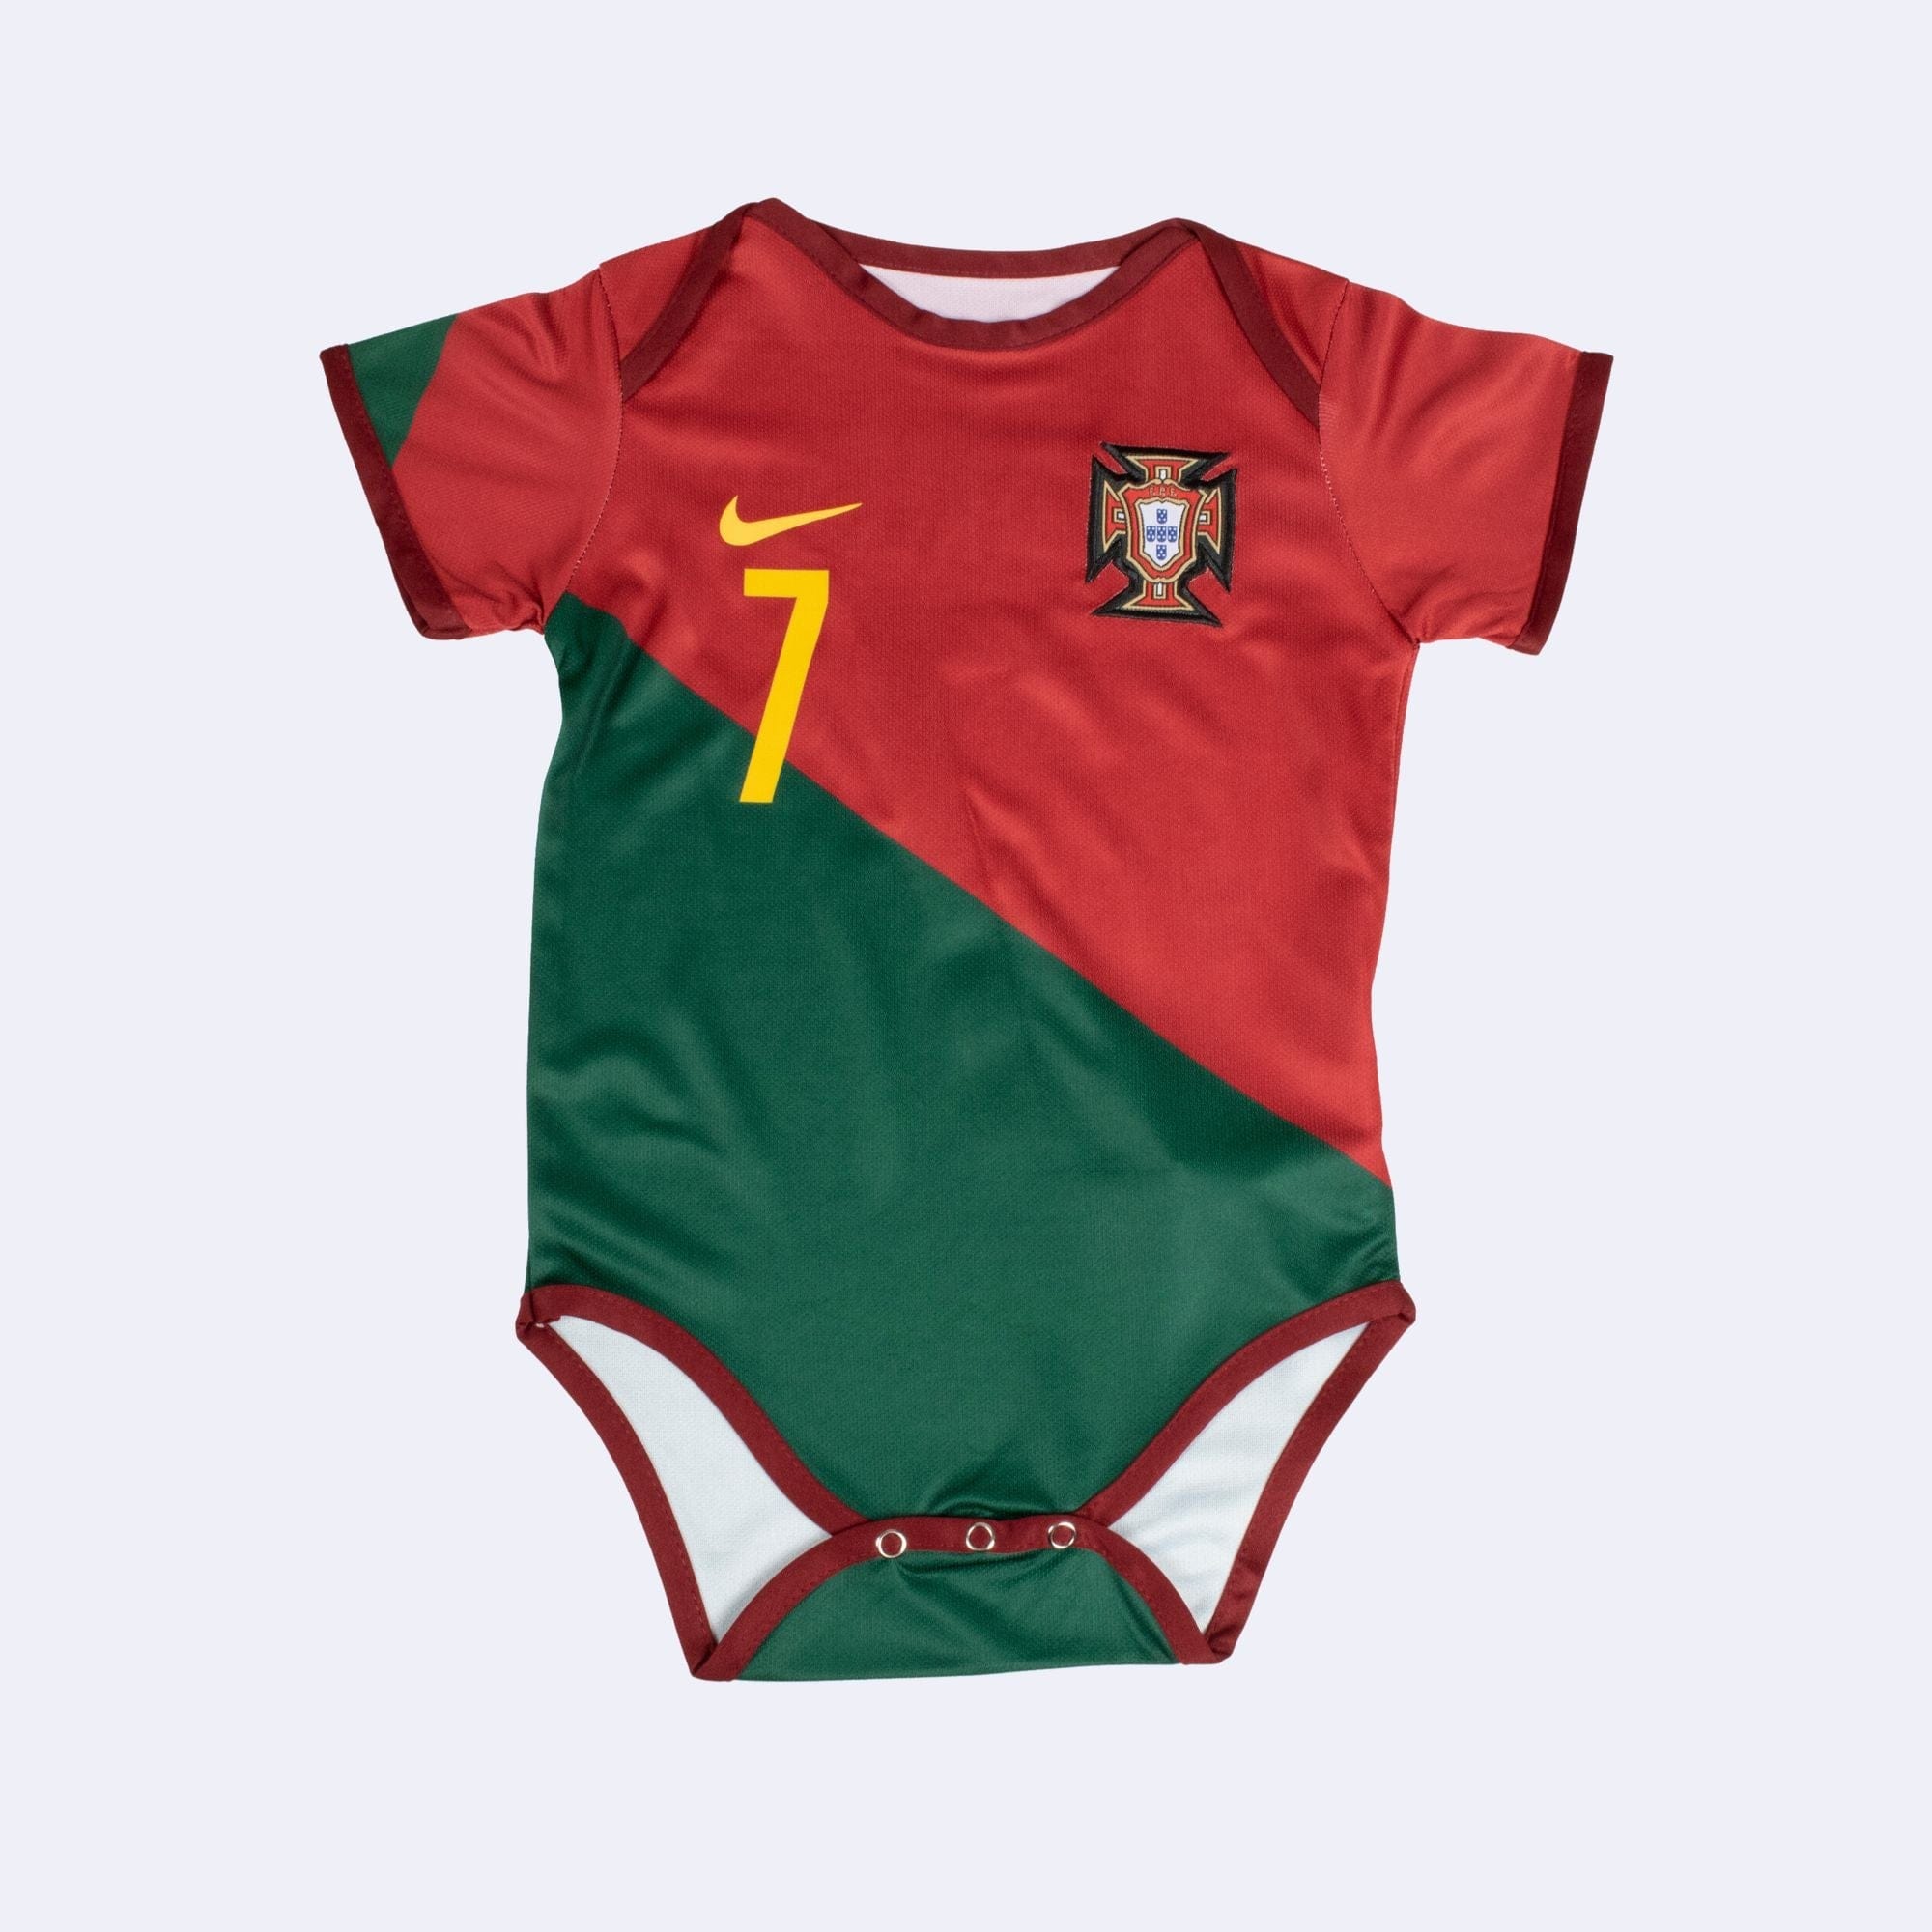 Portugal 23/24 Baby Jersey with Ronaldo TagPortugal 2023/24 Baby Jersey with Ronaldo Tag - Fan Gear